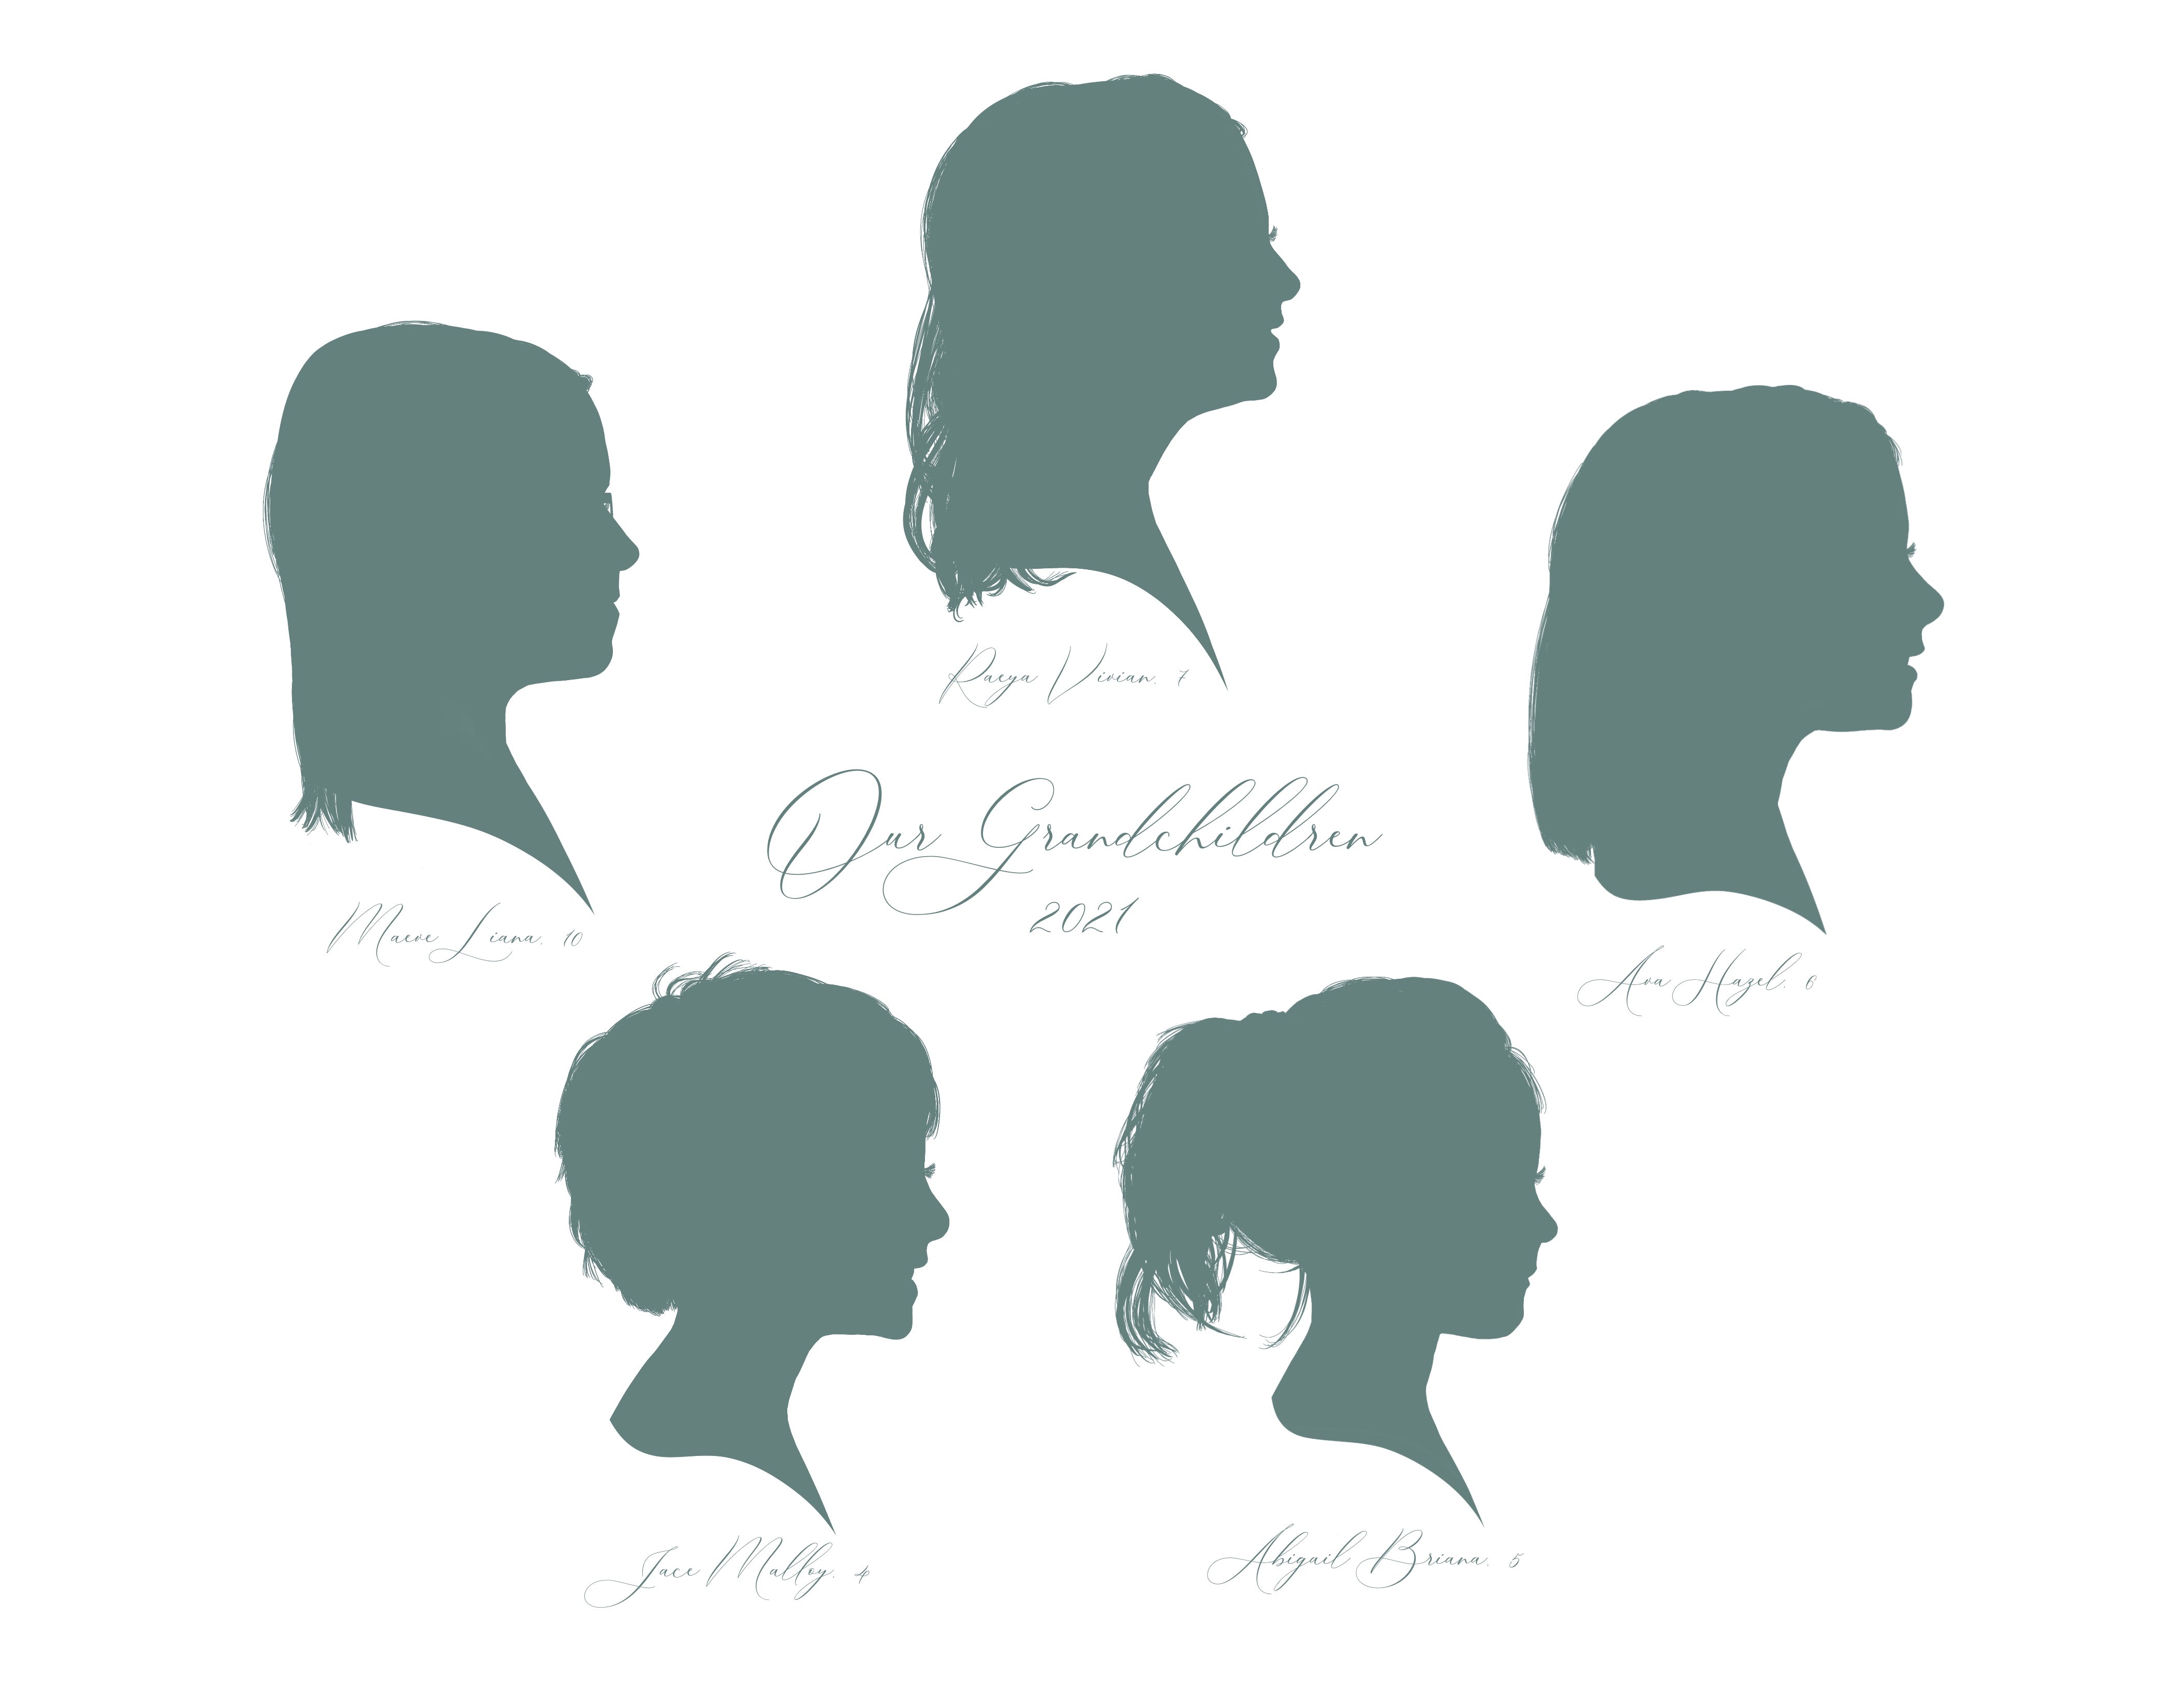 Green silhouettes of grandchildren arranged in a circle 